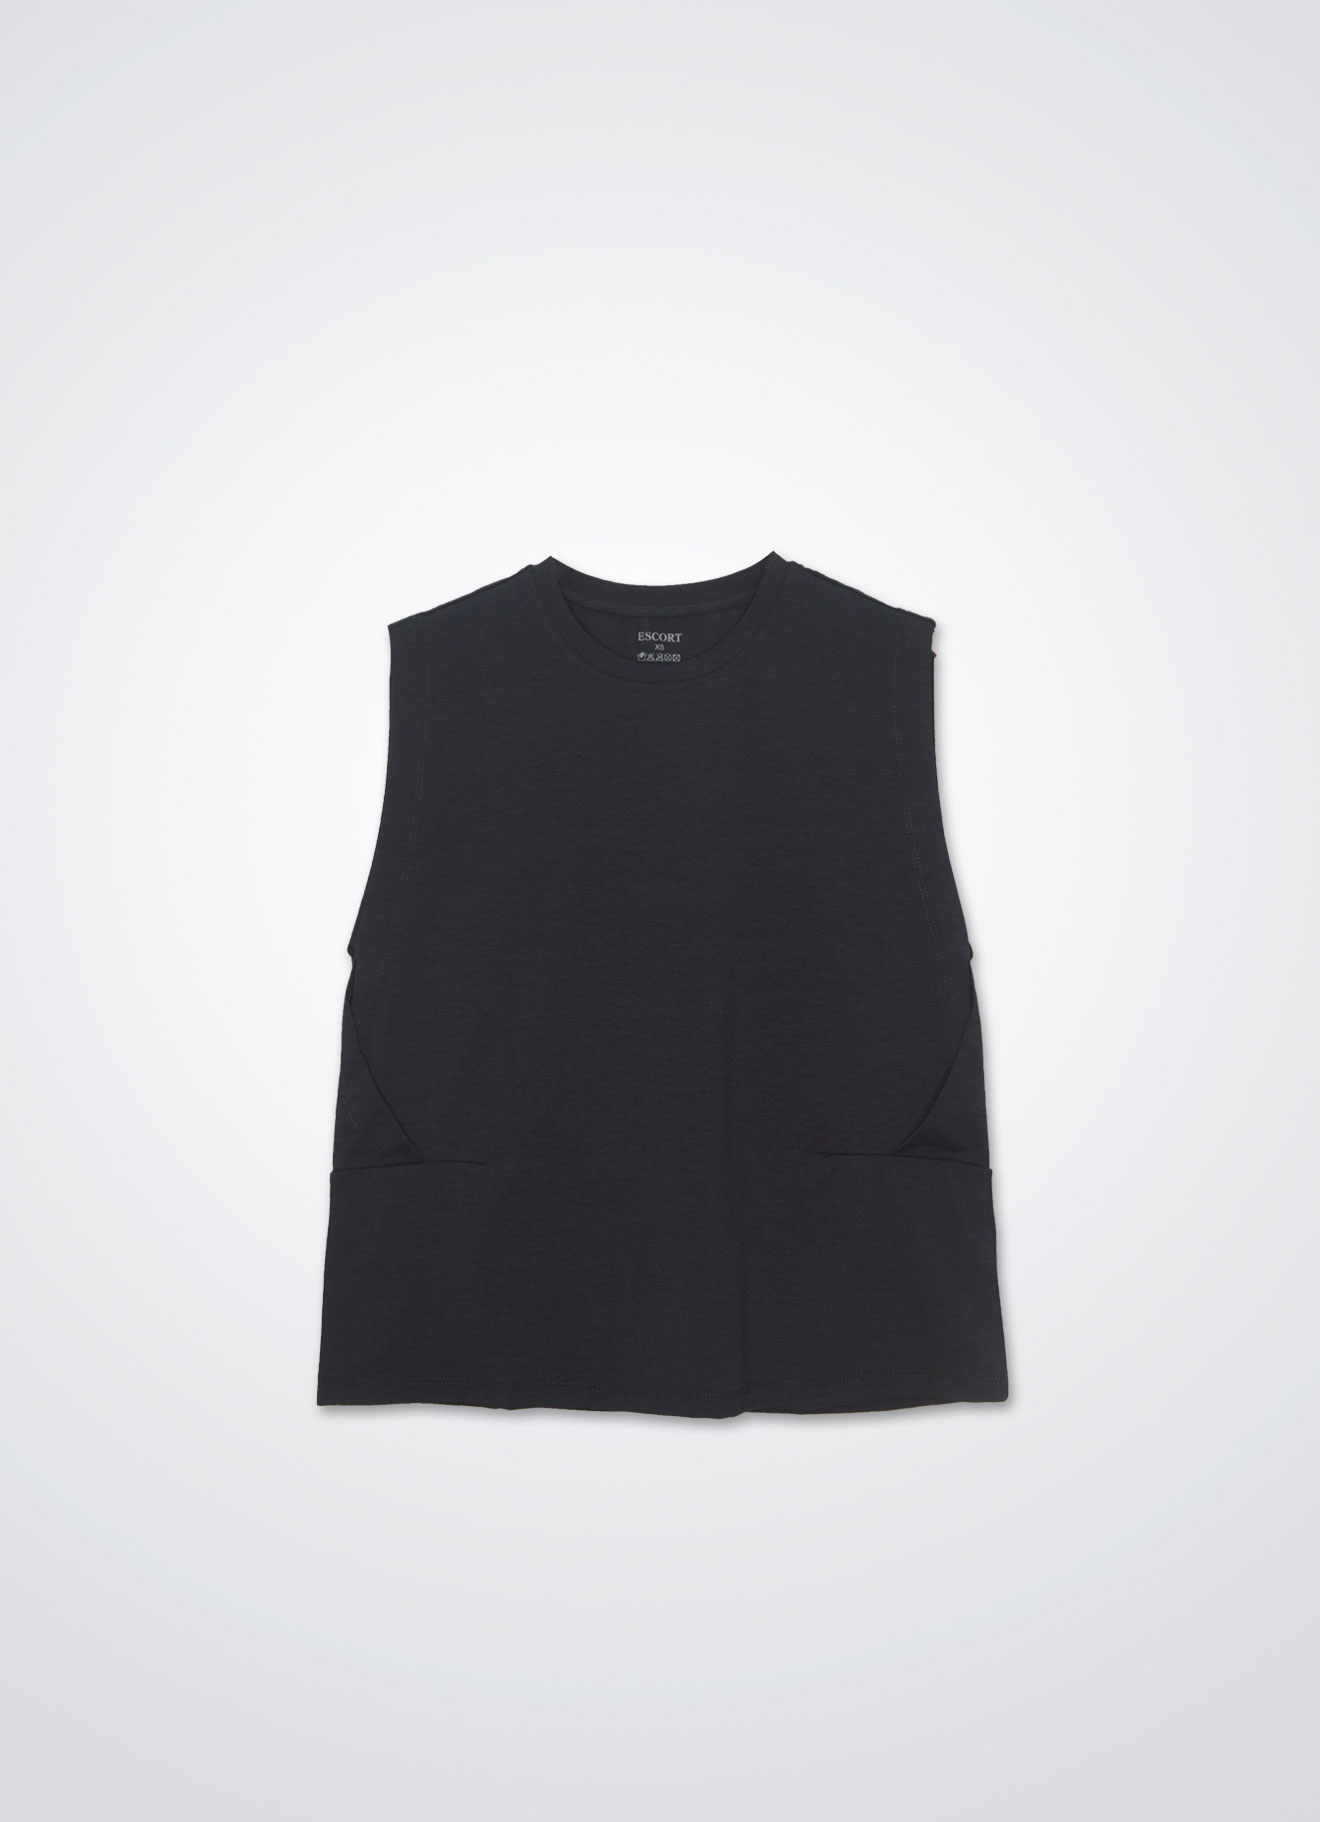 Peat by Sleeveless Top